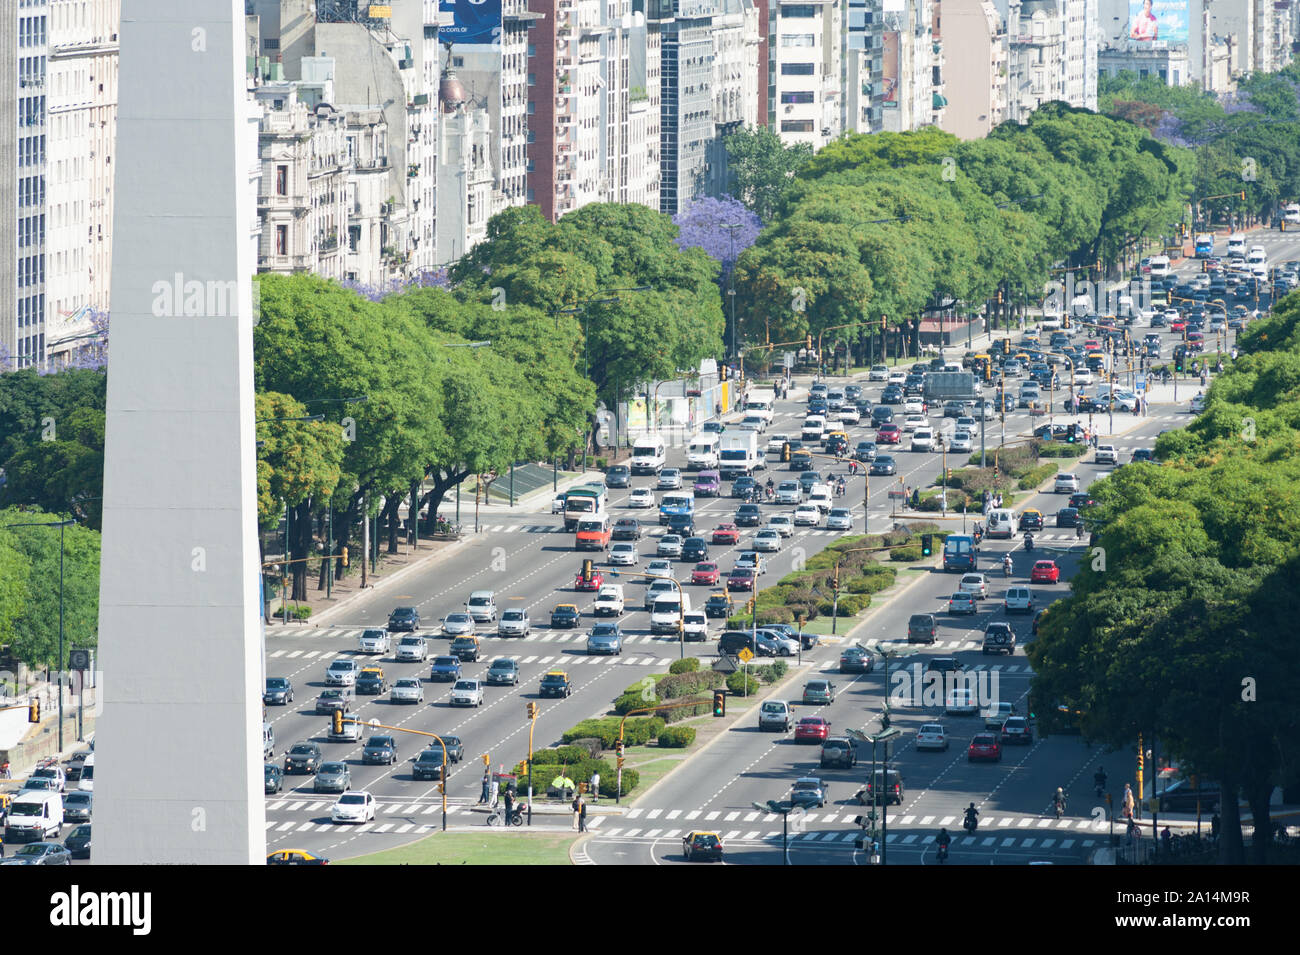 Buenos Aires, Argentina - November 14 2012: Rush hour and traffic on the sreets of Buenos Aires city. This photo shows the downtown and de 9 de Julio Stock Photo